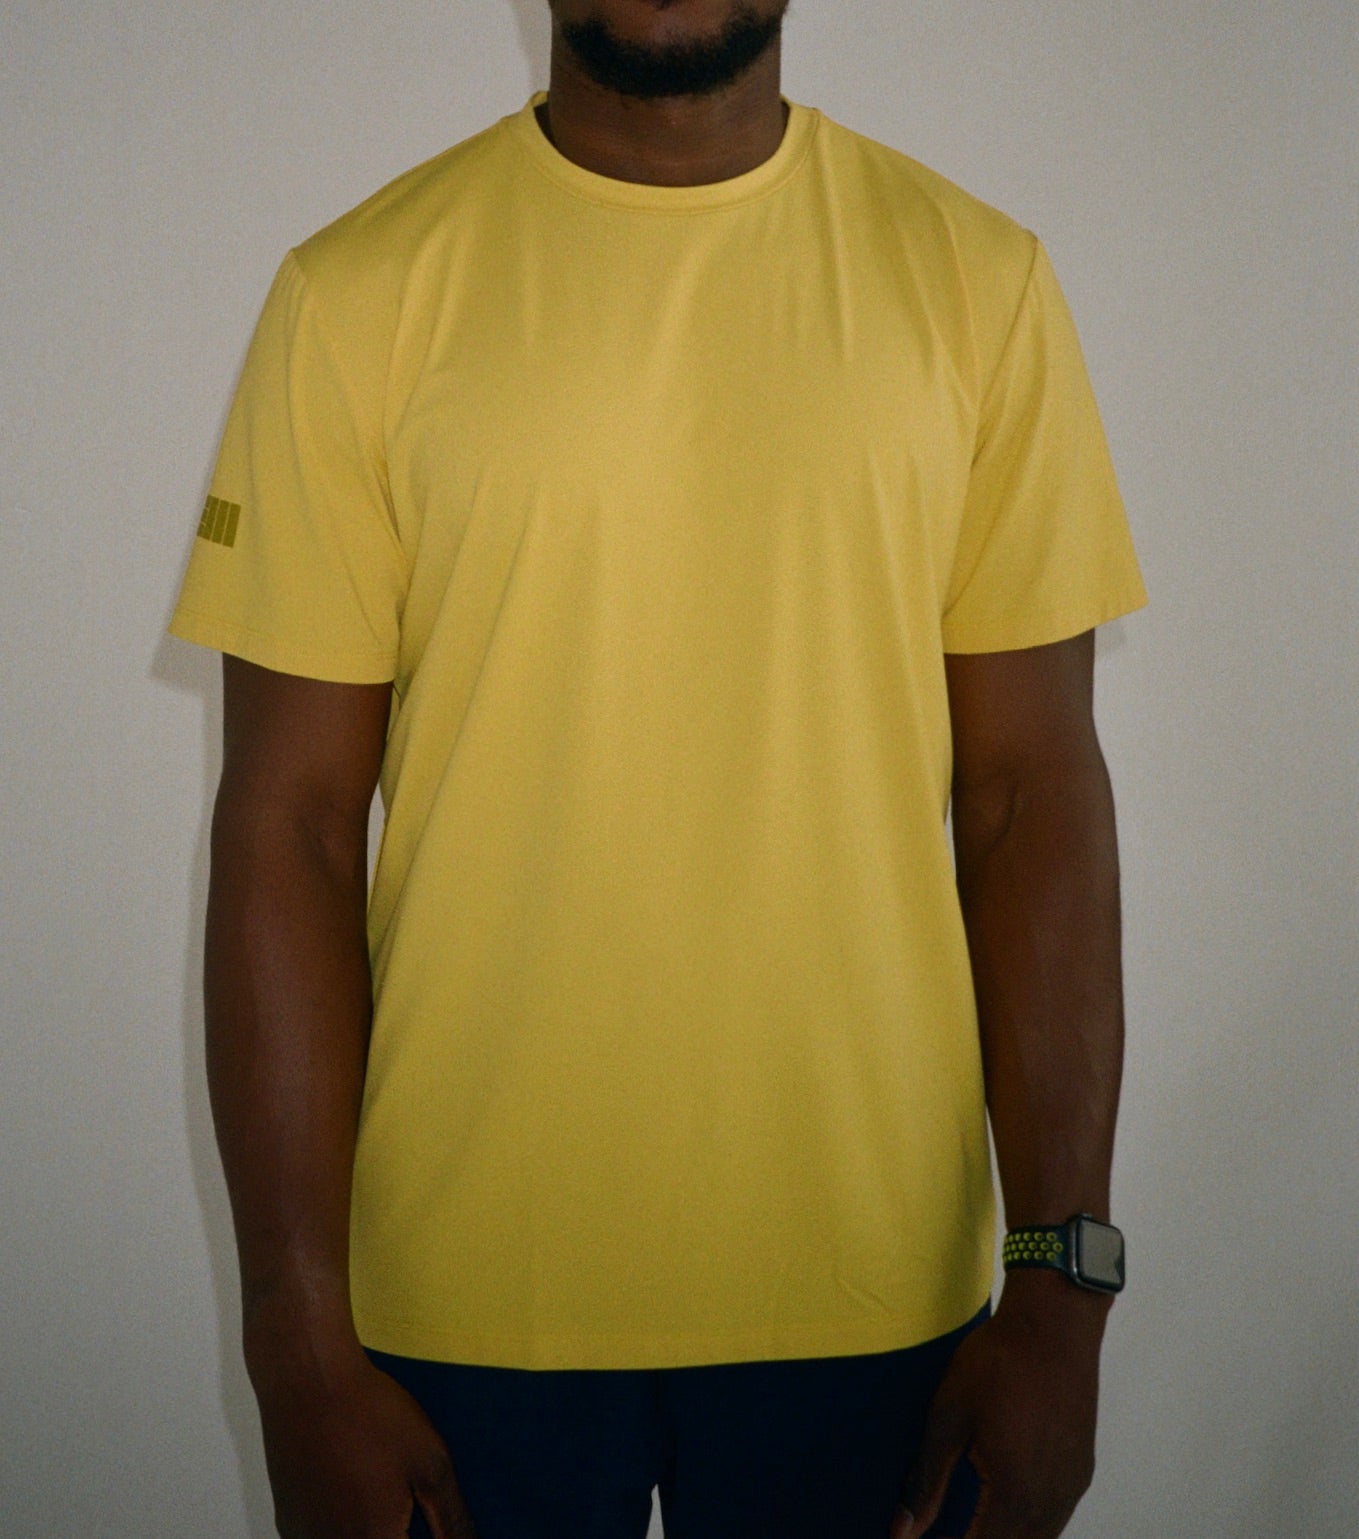 Mens Premium Athletic Shirt for Training and Leisure - Yellow